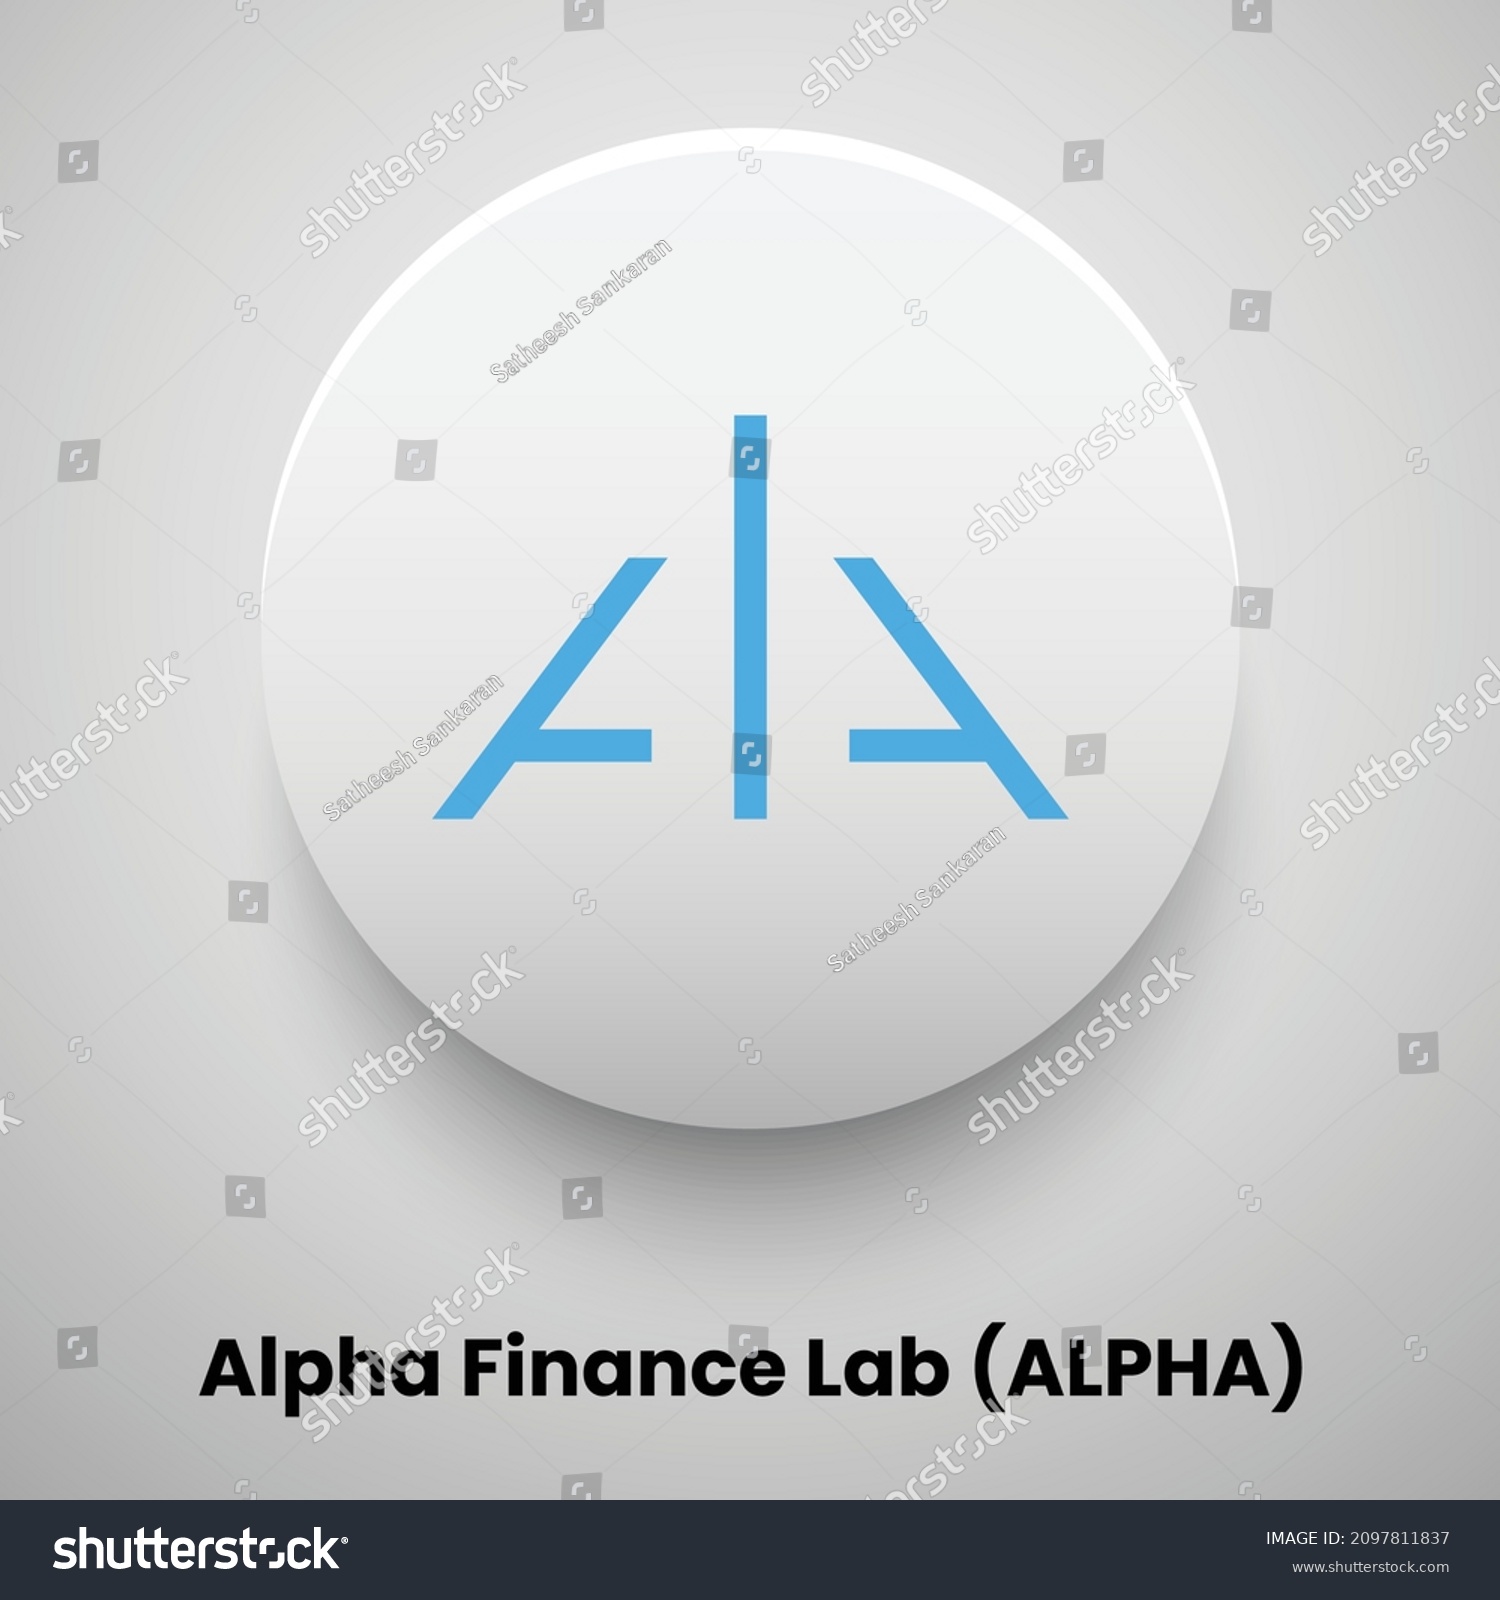 SVG of Creative block chain based crypto currency Alpha Finance Lab (ALPHA) logo vector illustration design. Can be used as currency icon, badge, label, symbol, sticker and print background template svg